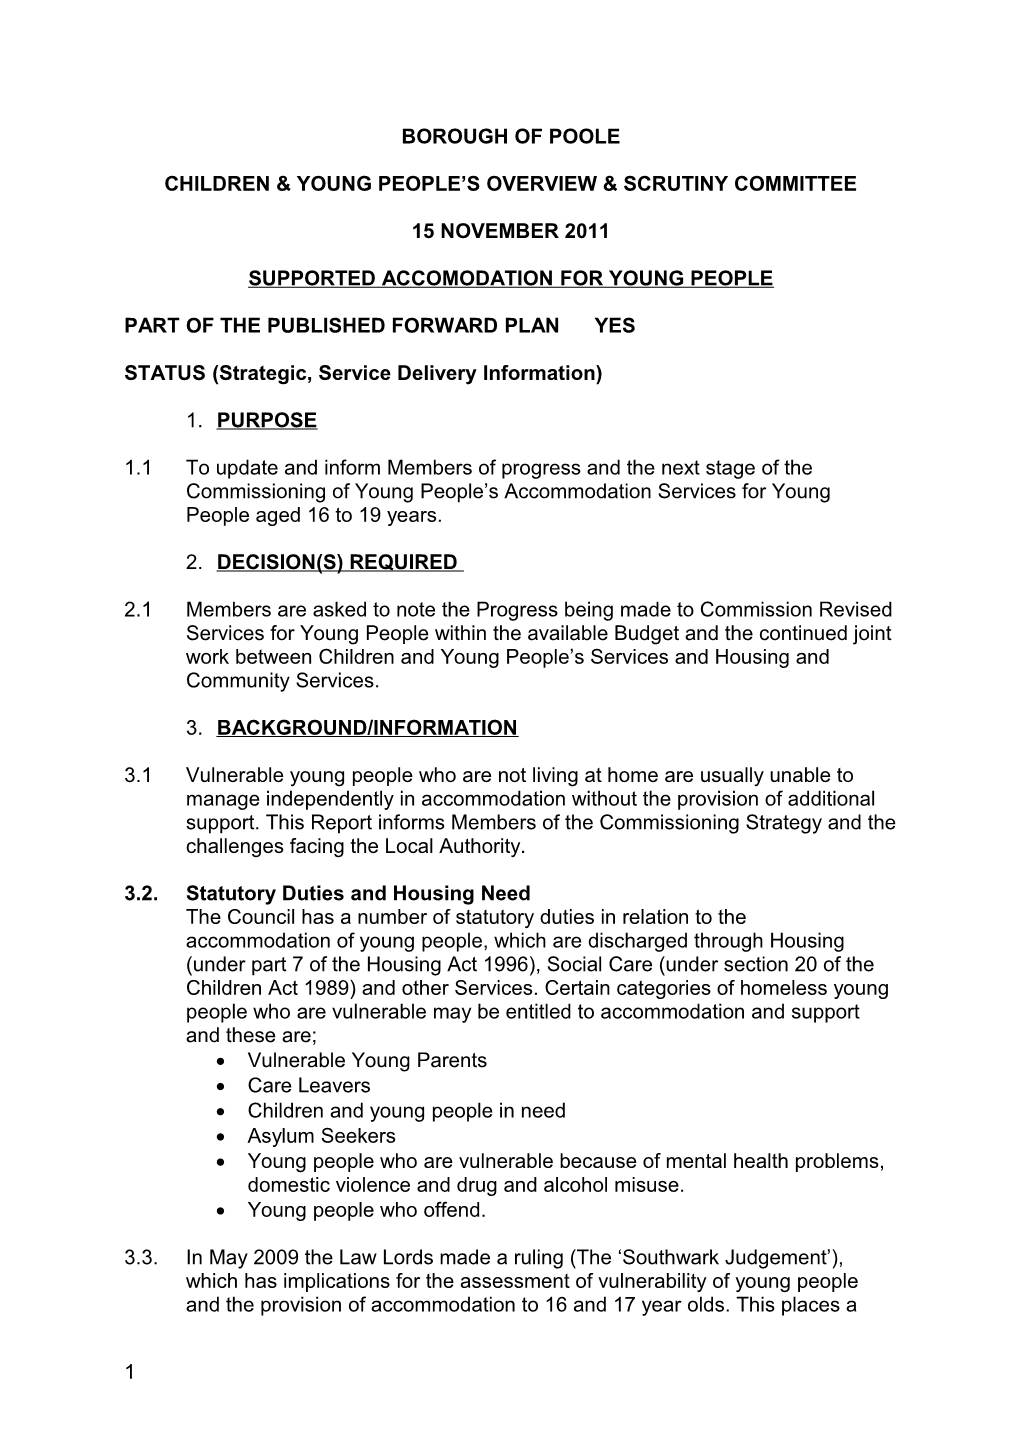 Children & Young People S Overview & Scrutiny Committee